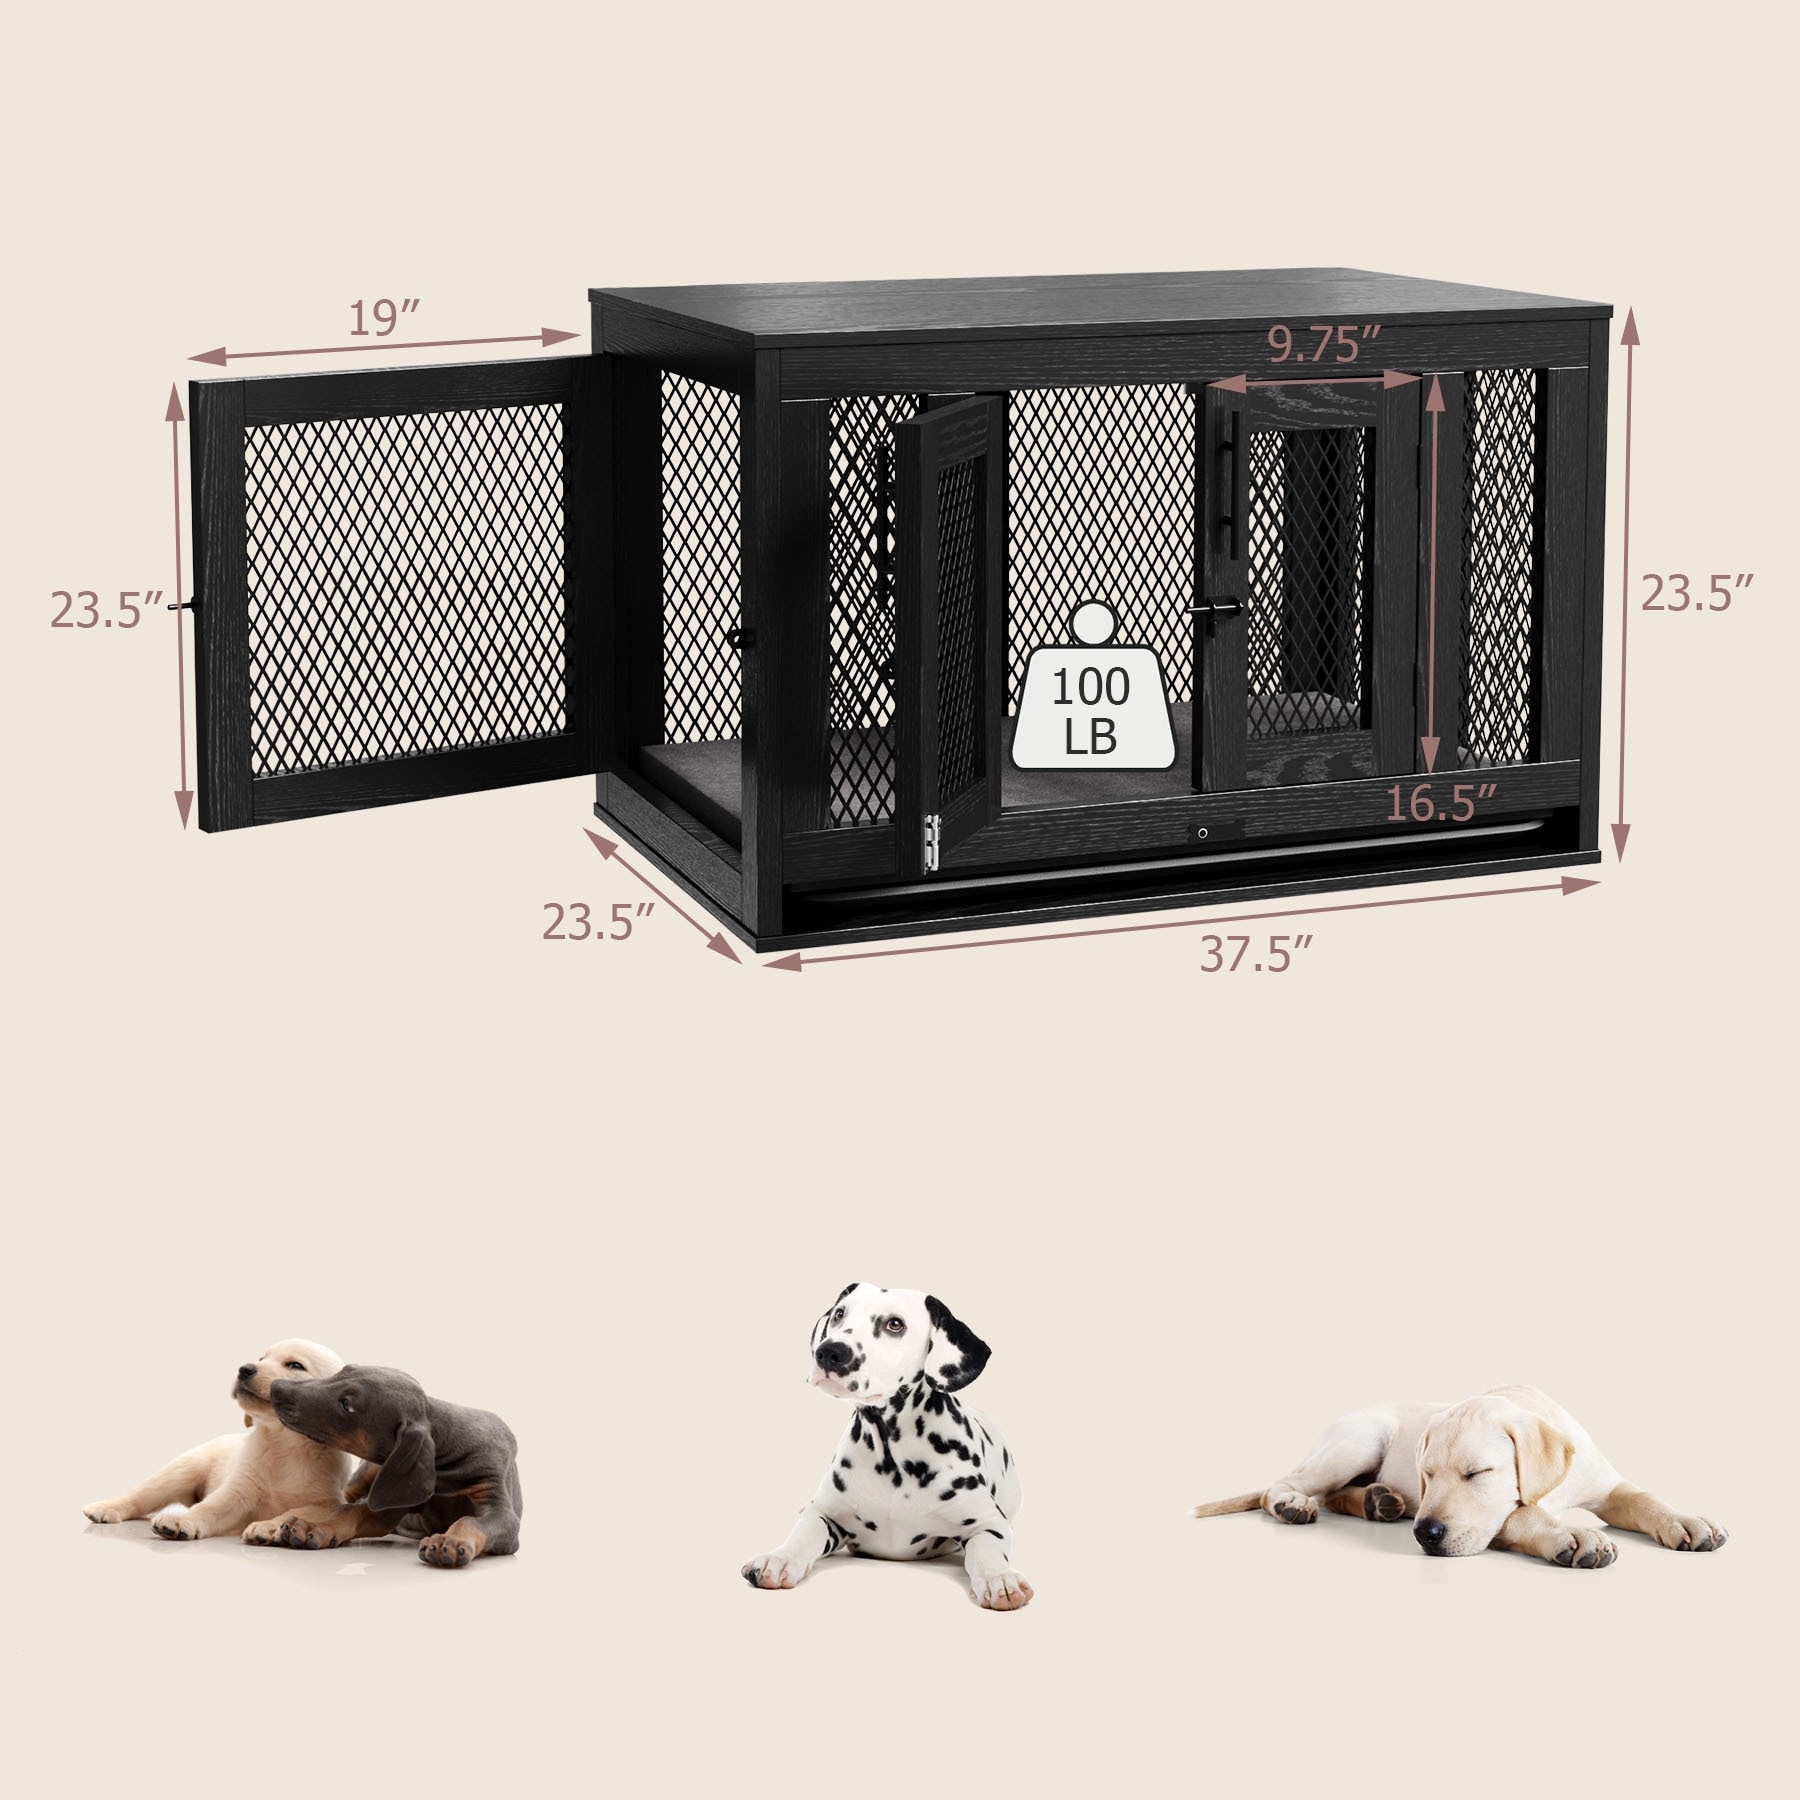 https://ak1.ostkcdn.com/images/products/is/images/direct/ee8156da70c76b106c41d4808b28ffffb8dd9252/Dog-Crate-with-Cushion-and-Tray-Heavy-Duty-Dog-Kennel-Double-Doors.jpg